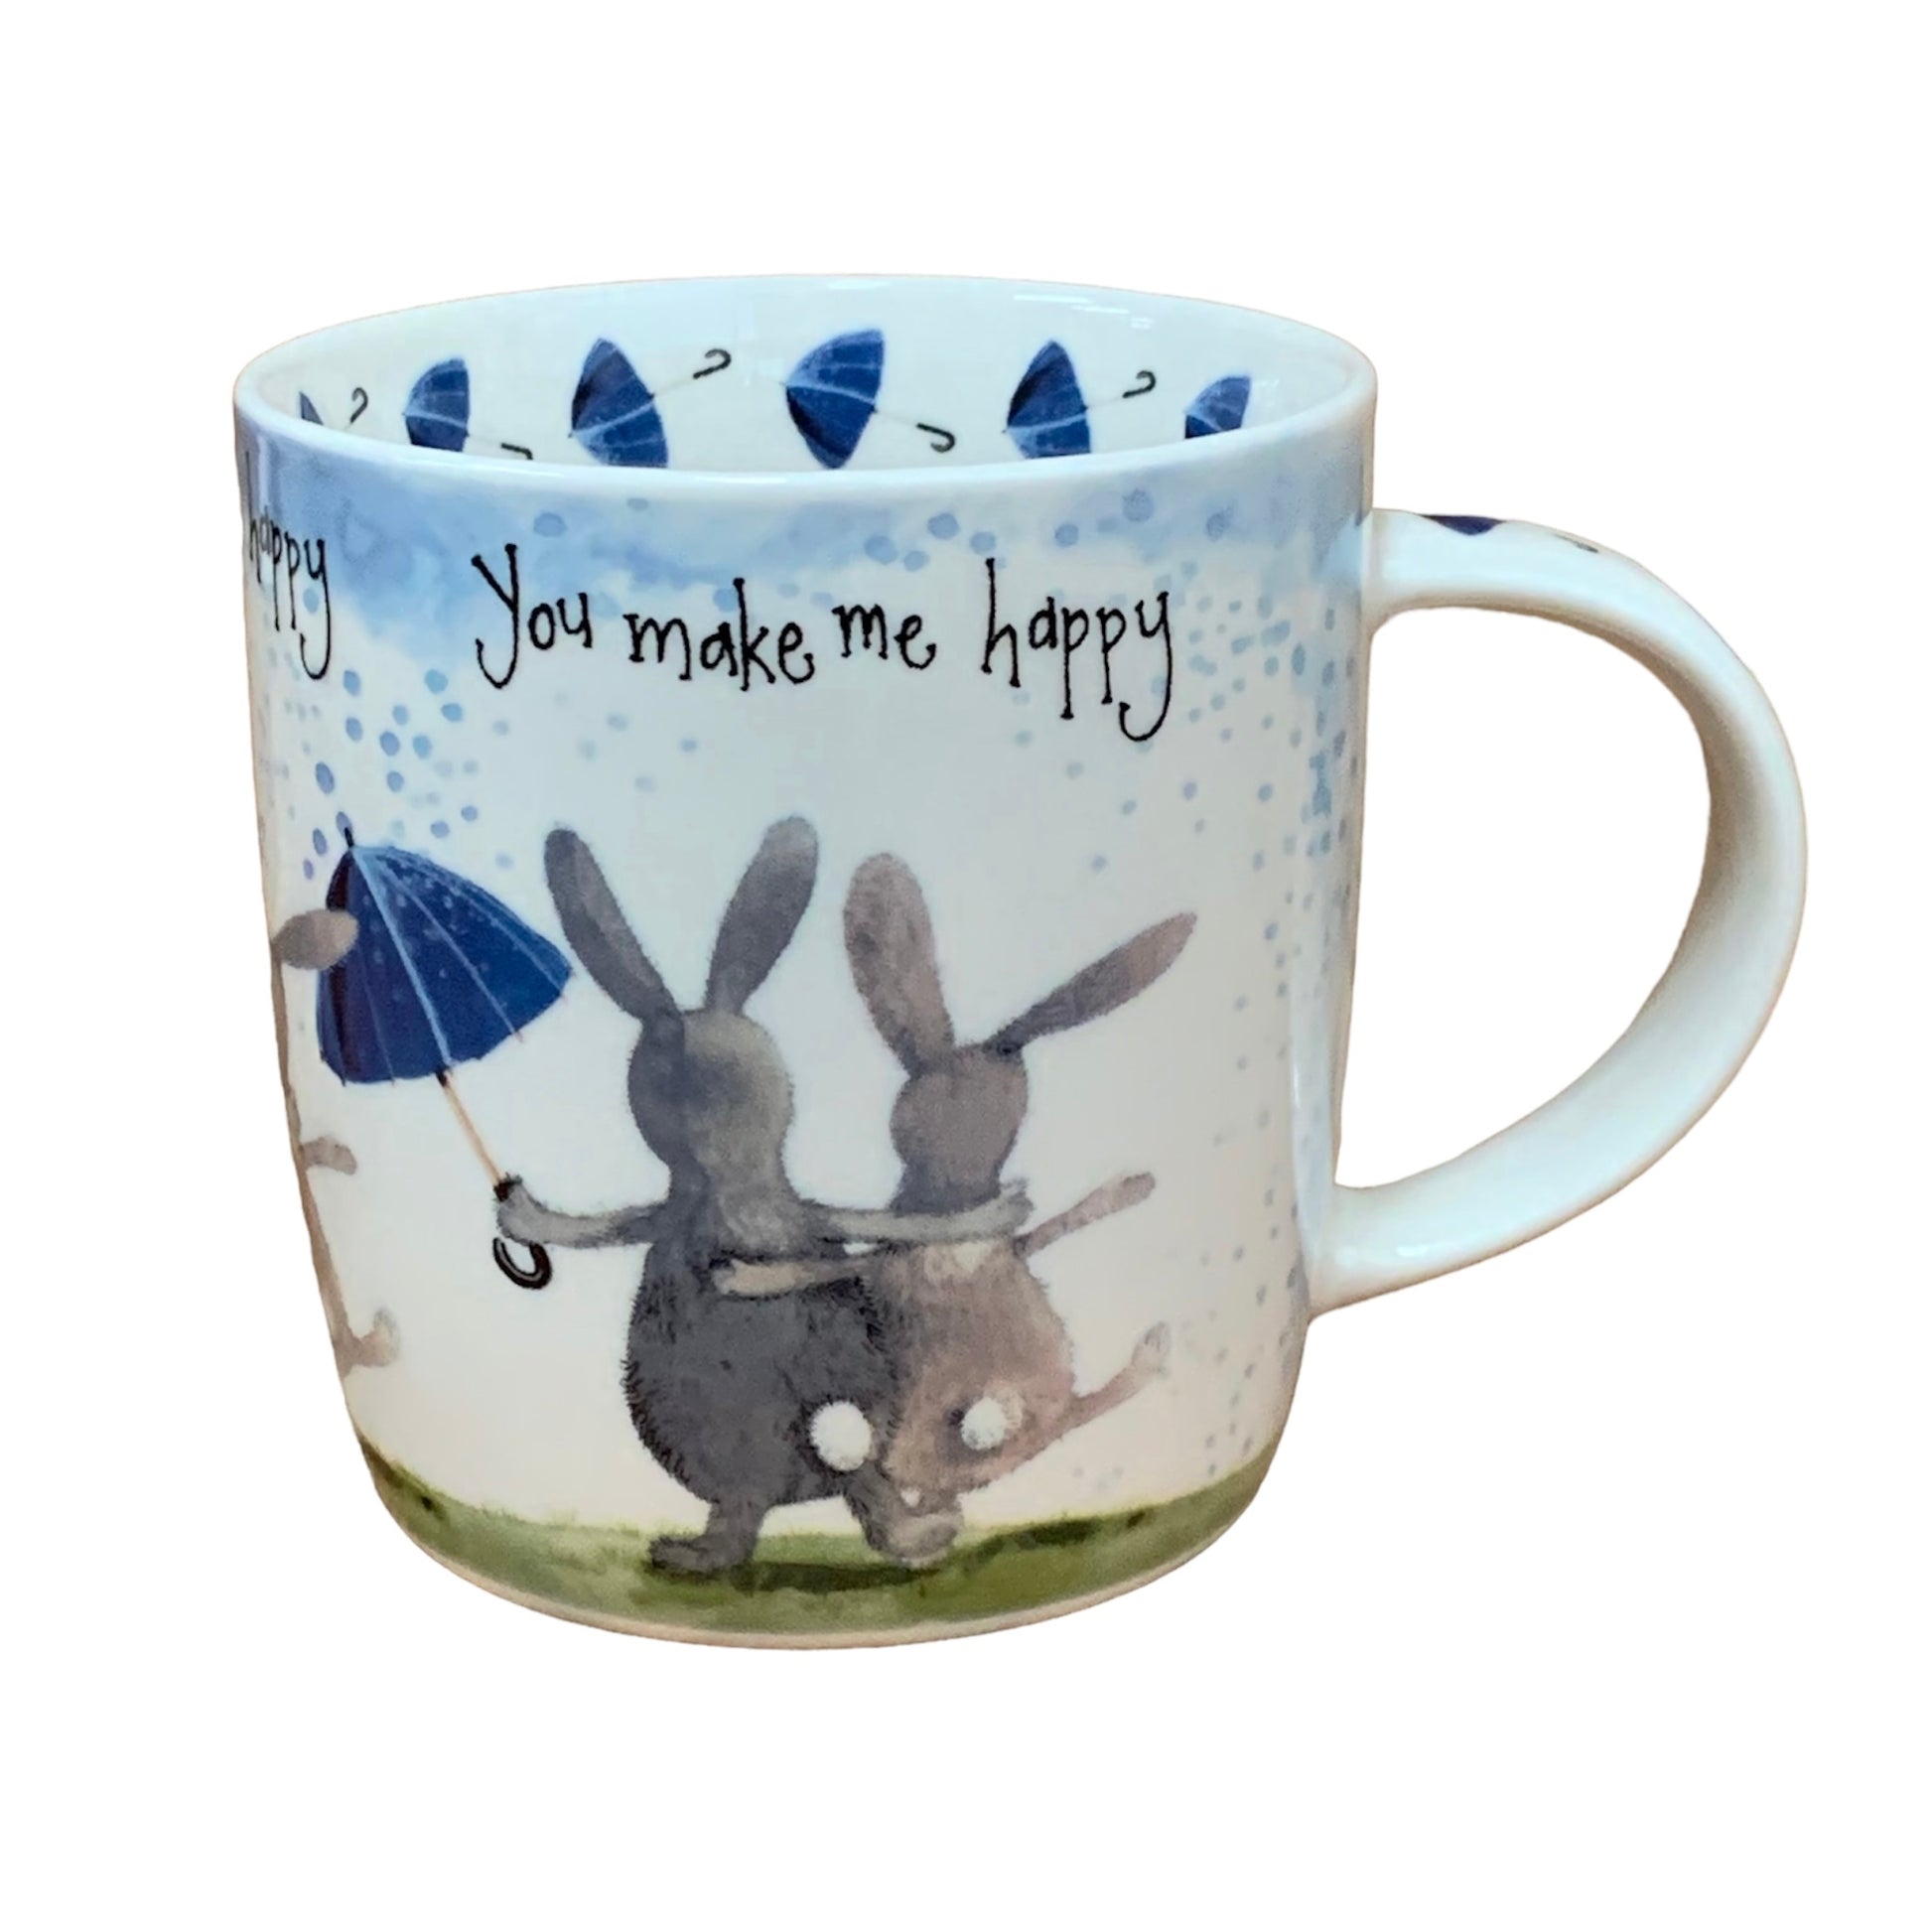 This Alex Clark mug is illustrated with two lovely really happy bunny rabbits & the words "you make me happy" along the top of the mug.  This mug also features a little umbrellas  illustration around the inside rim & illustrations down the handle.  